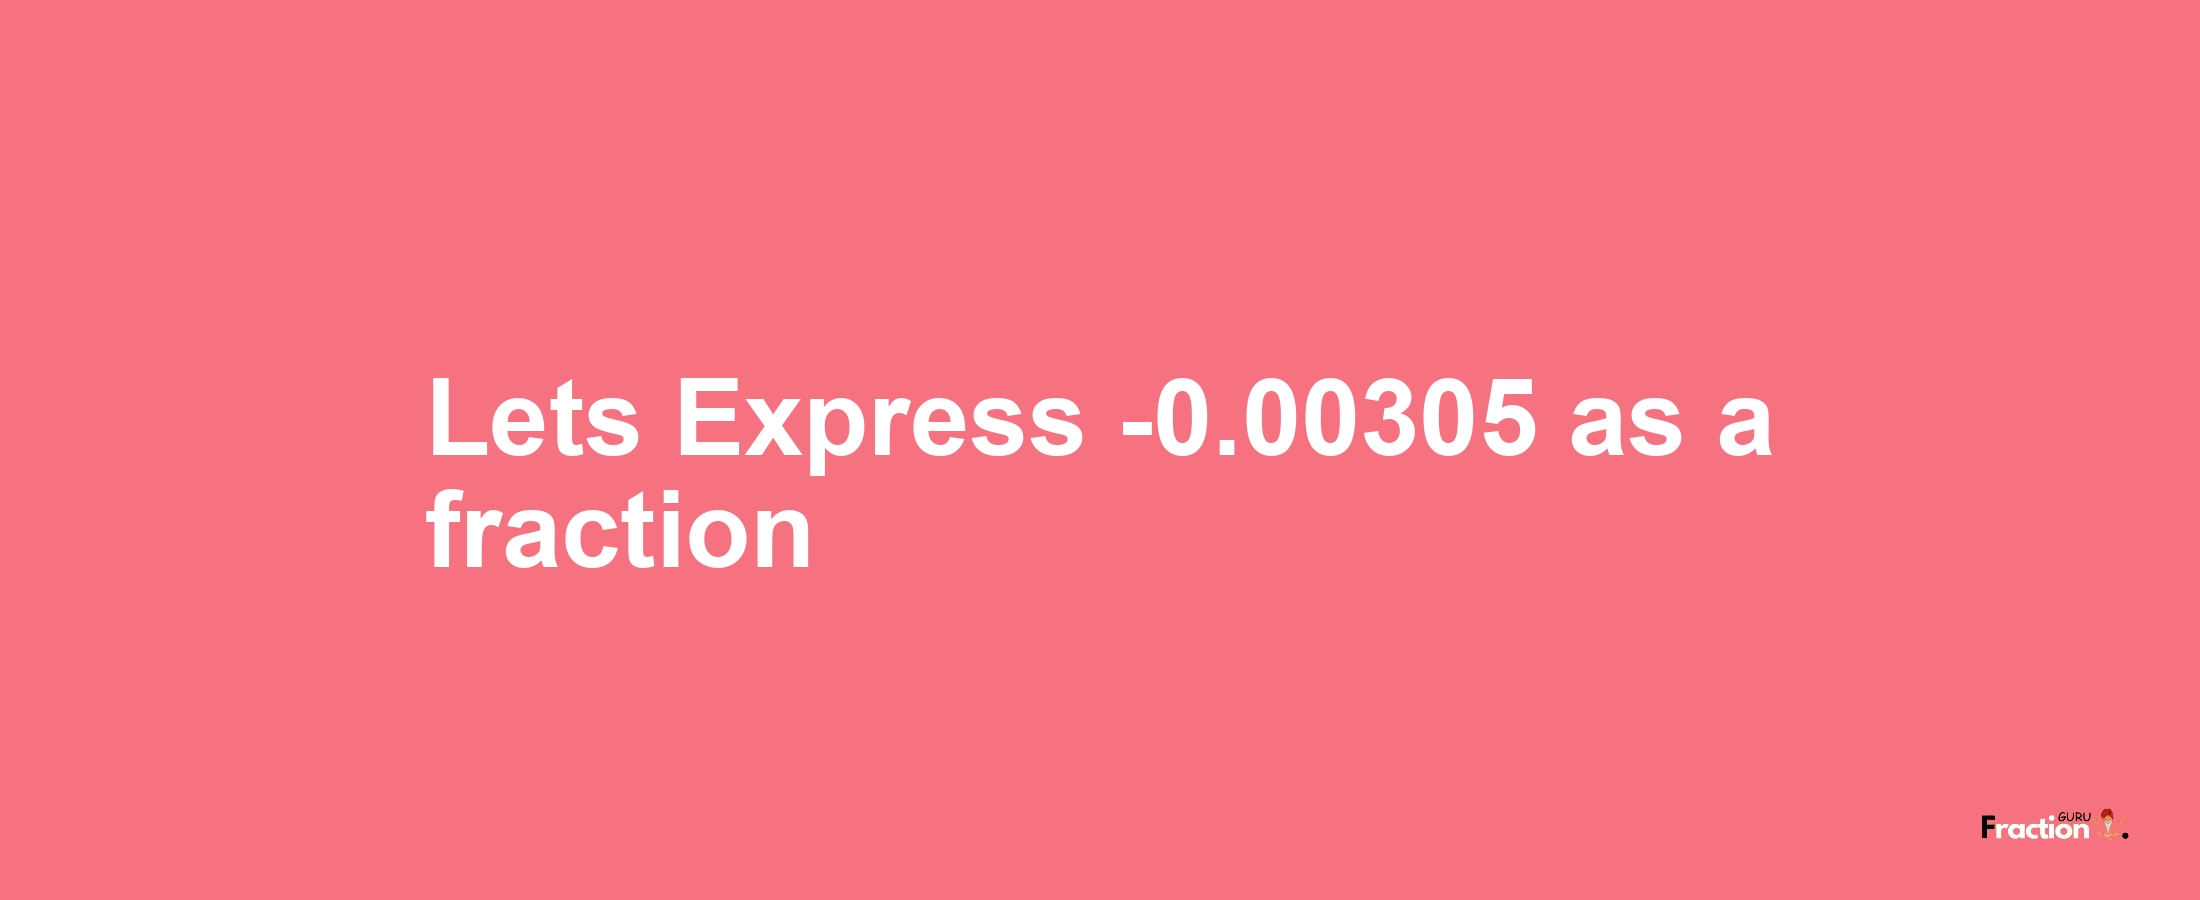 Lets Express -0.00305 as afraction